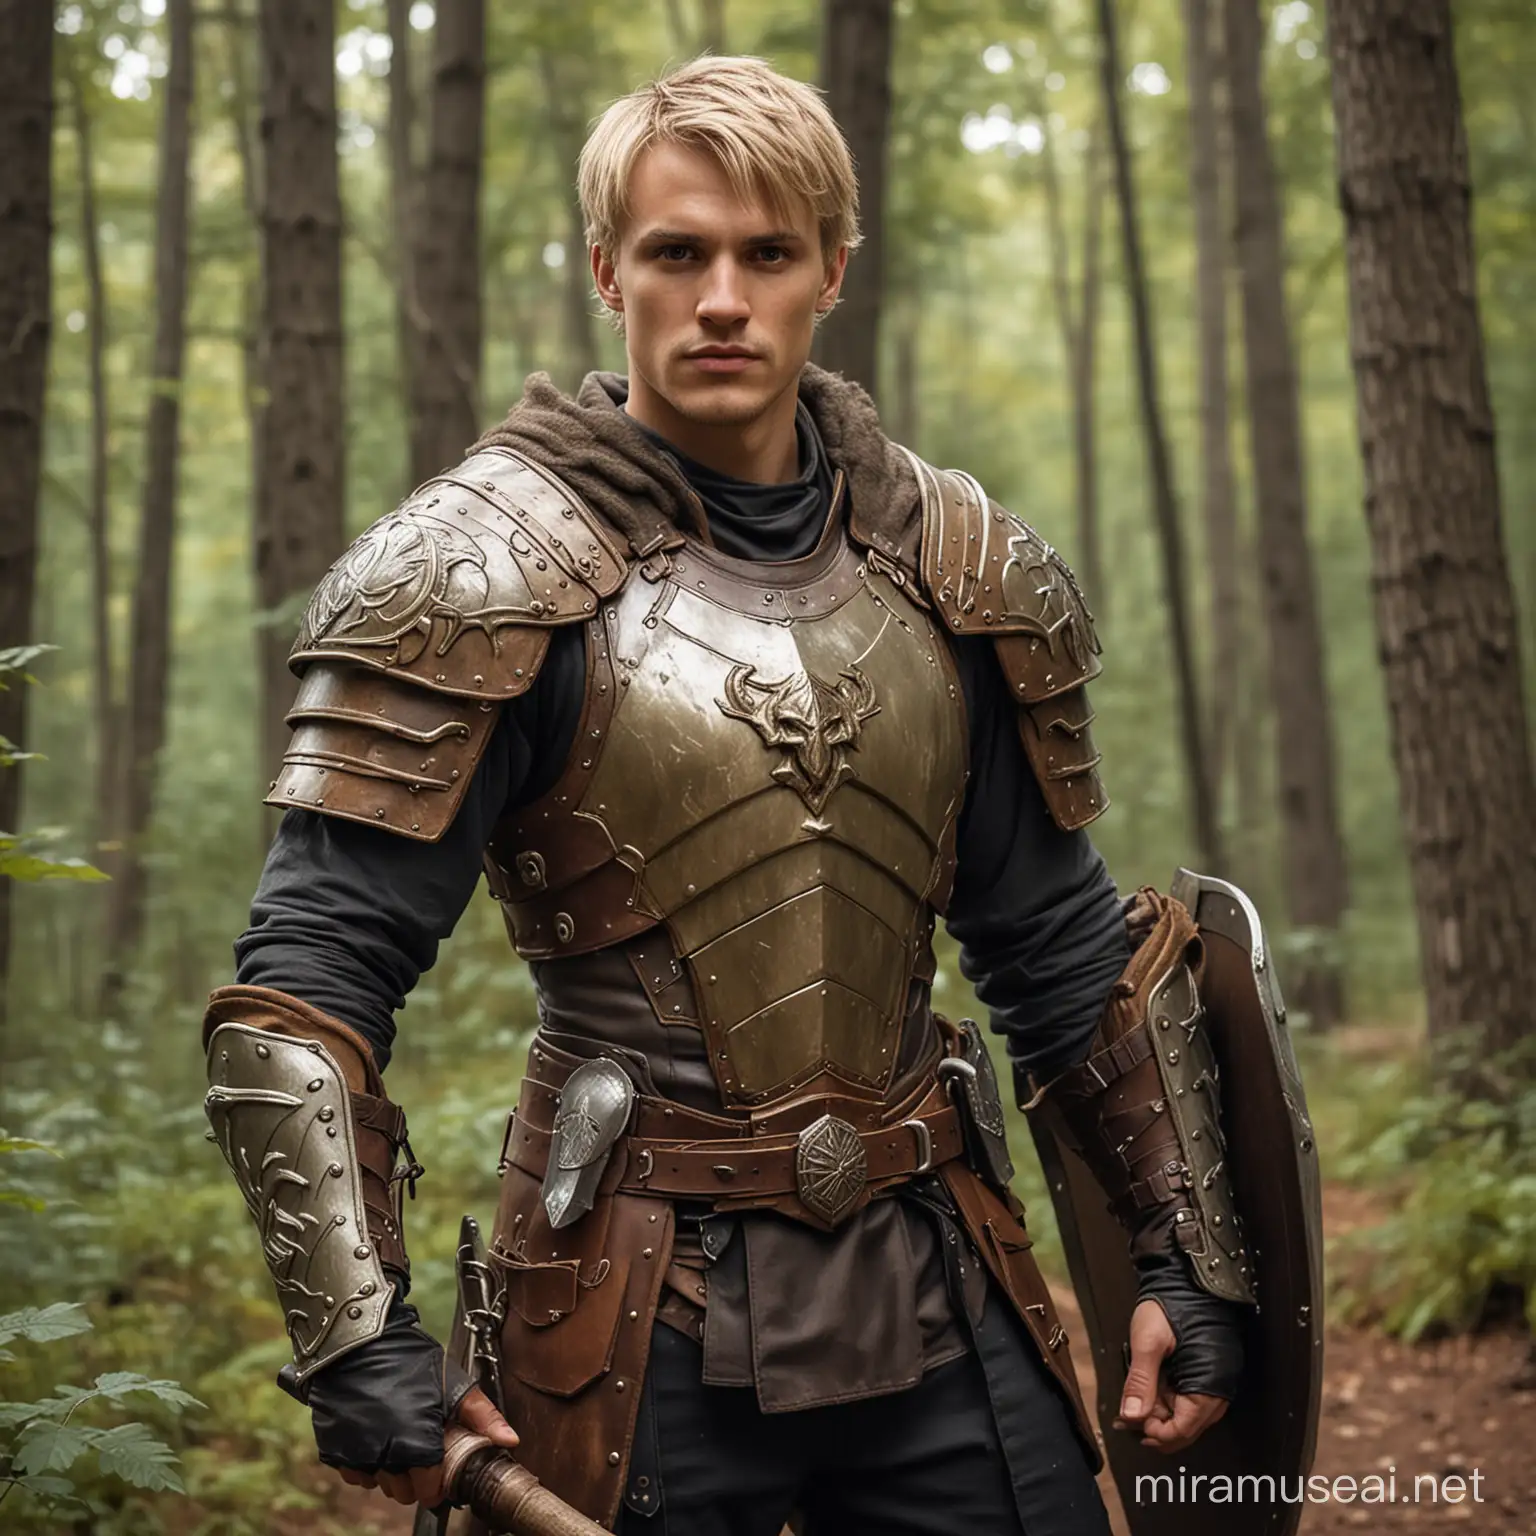 Man Cleric medic Leather armor druid dirty blonde short hair brown eyes Skinny with Shield and mace at side in forest background